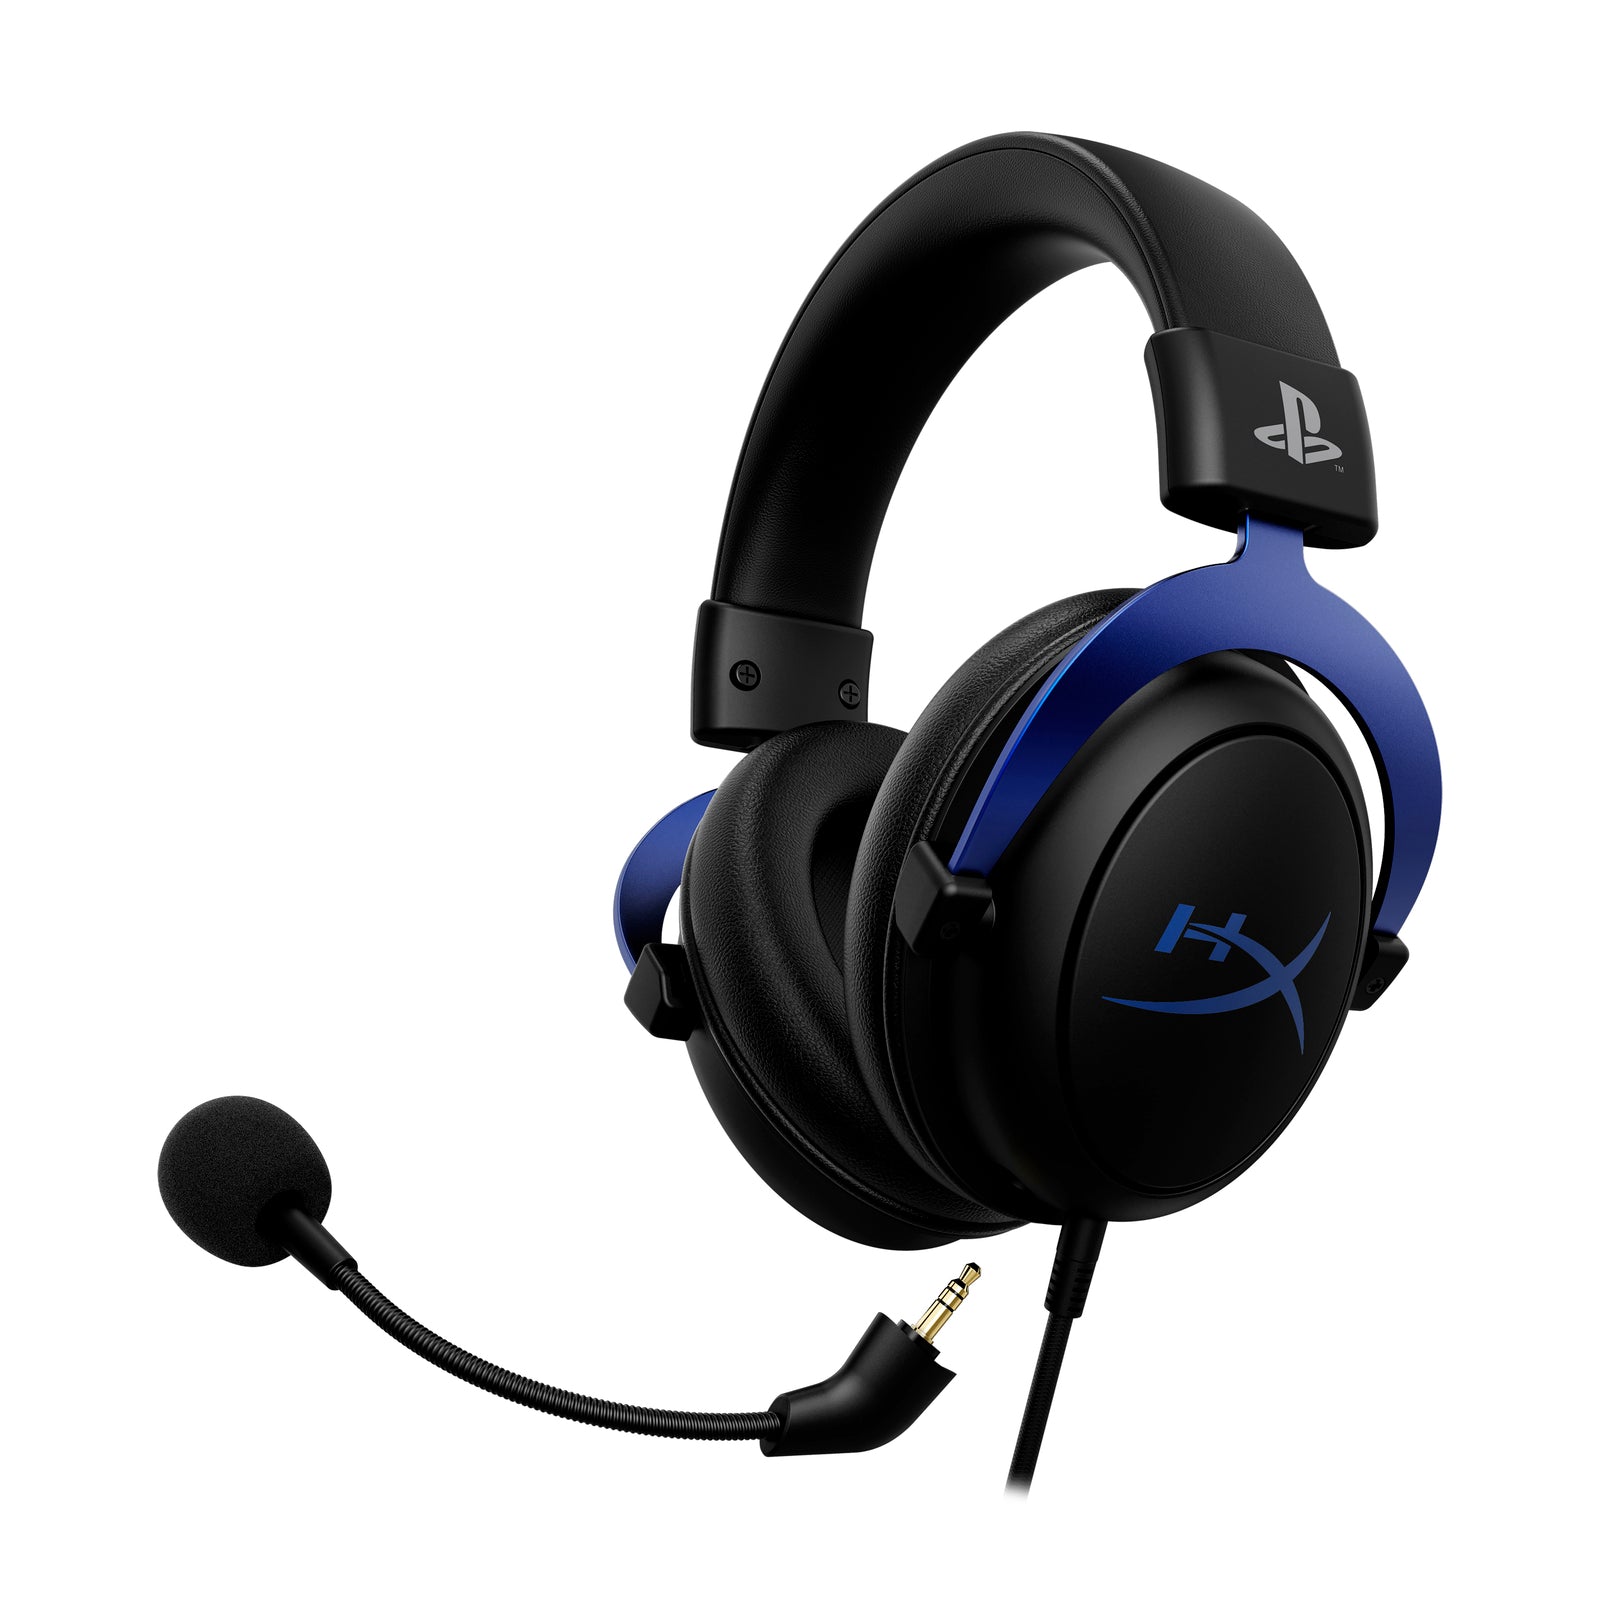 HyperX Cloud Blue Gaming Headset Showing Detachable Microphone